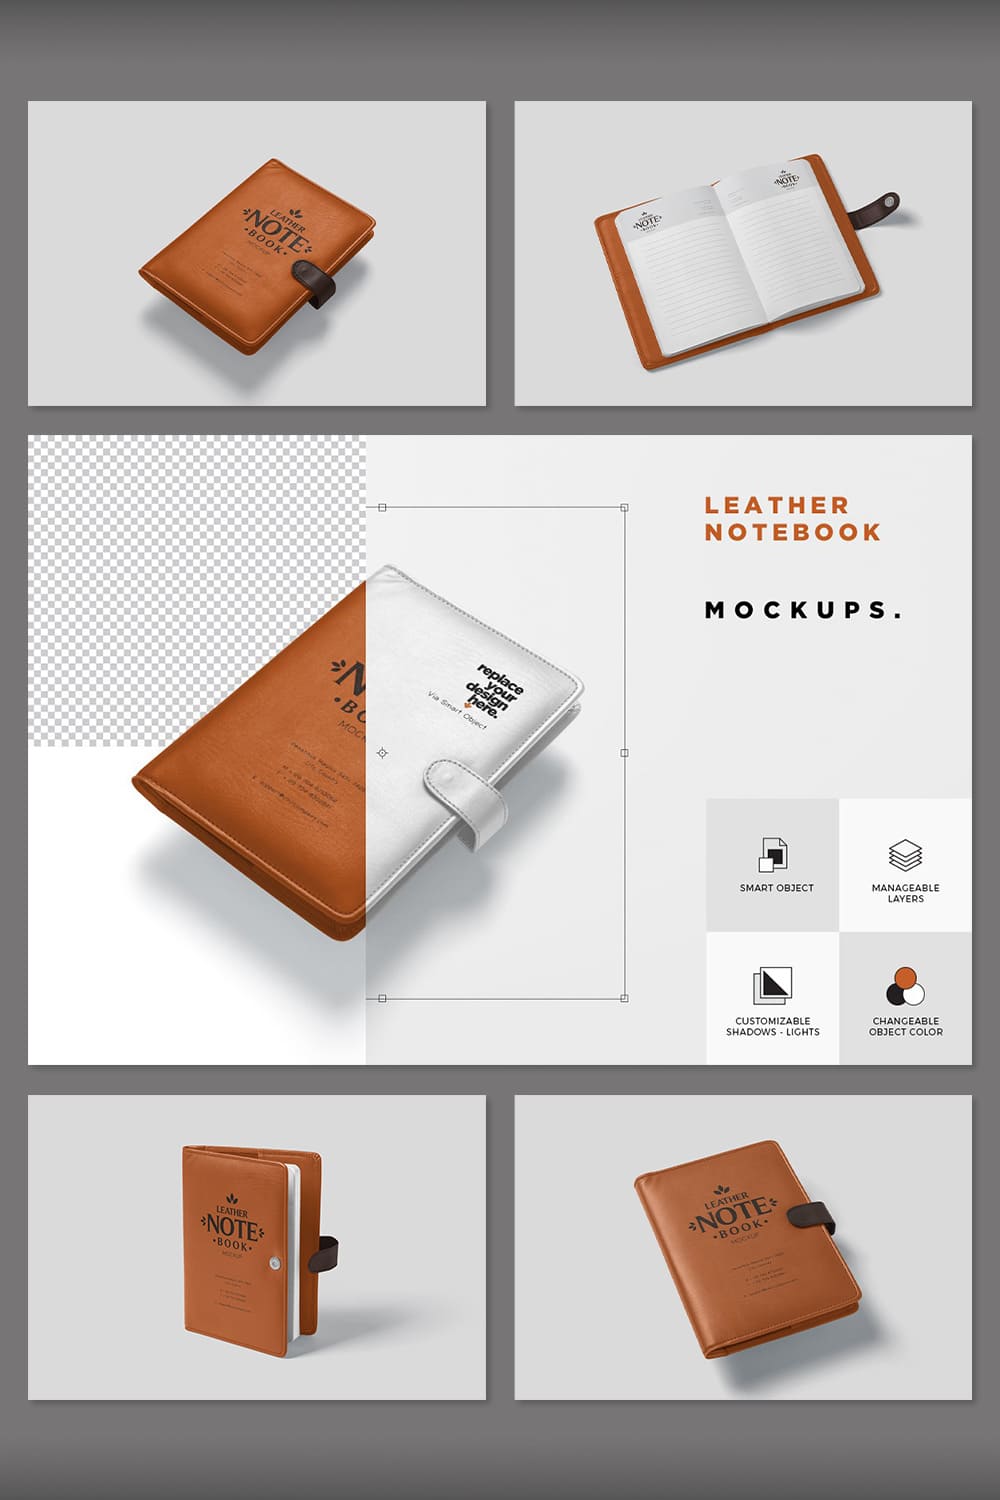 Collection of images of leather notebooks with great designs.